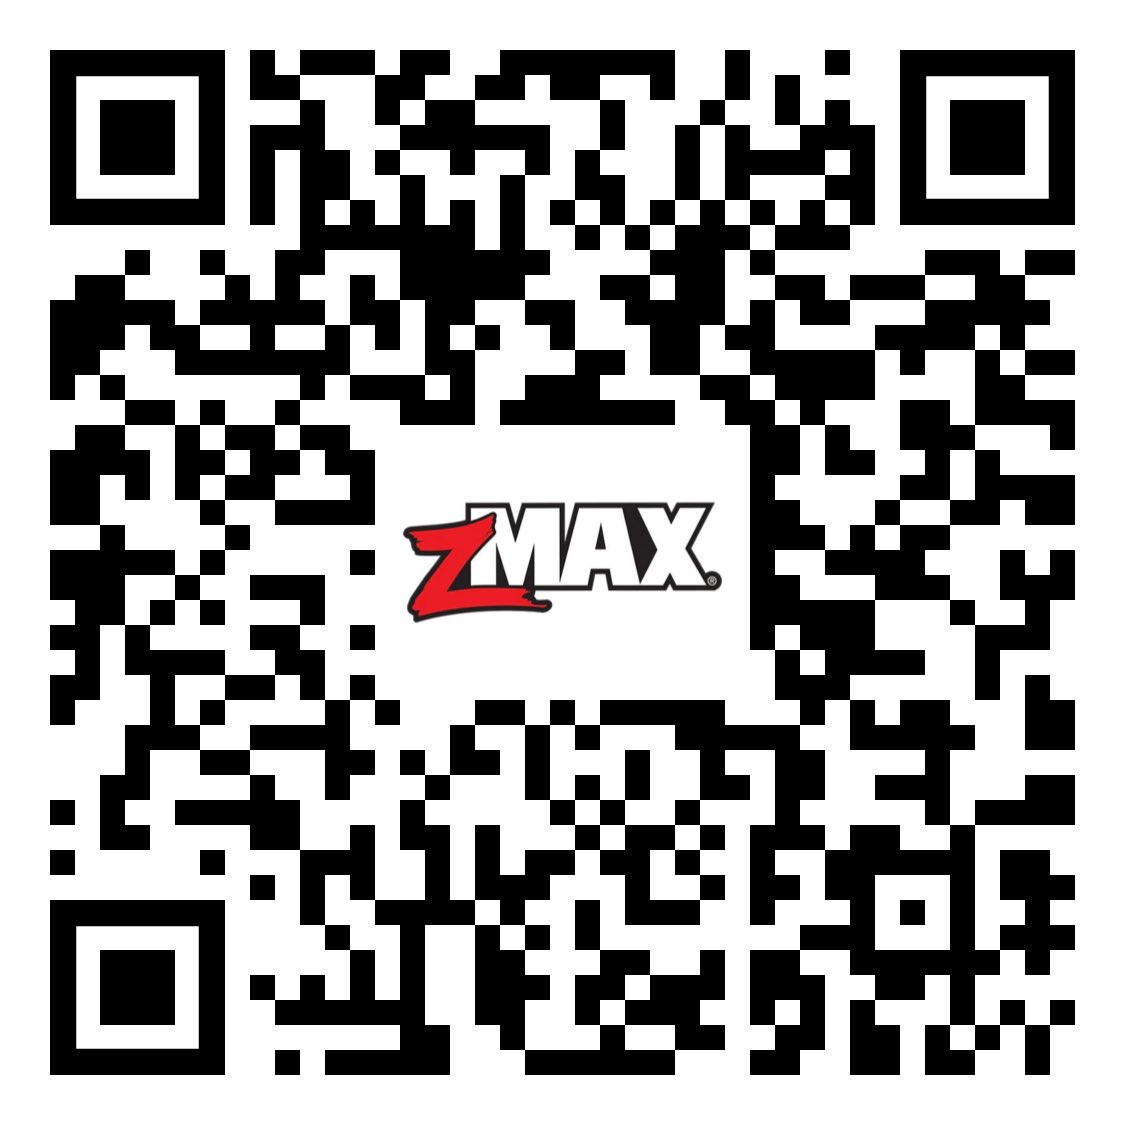 The new @zmaxraceproducts catalog is available for electronic download. Just scan our QR Code, and checkout all of the products from @zmaxraceproducts and @zmaxformula #zmax #electroniccatalog #greatproducts #wevegotyoucovered